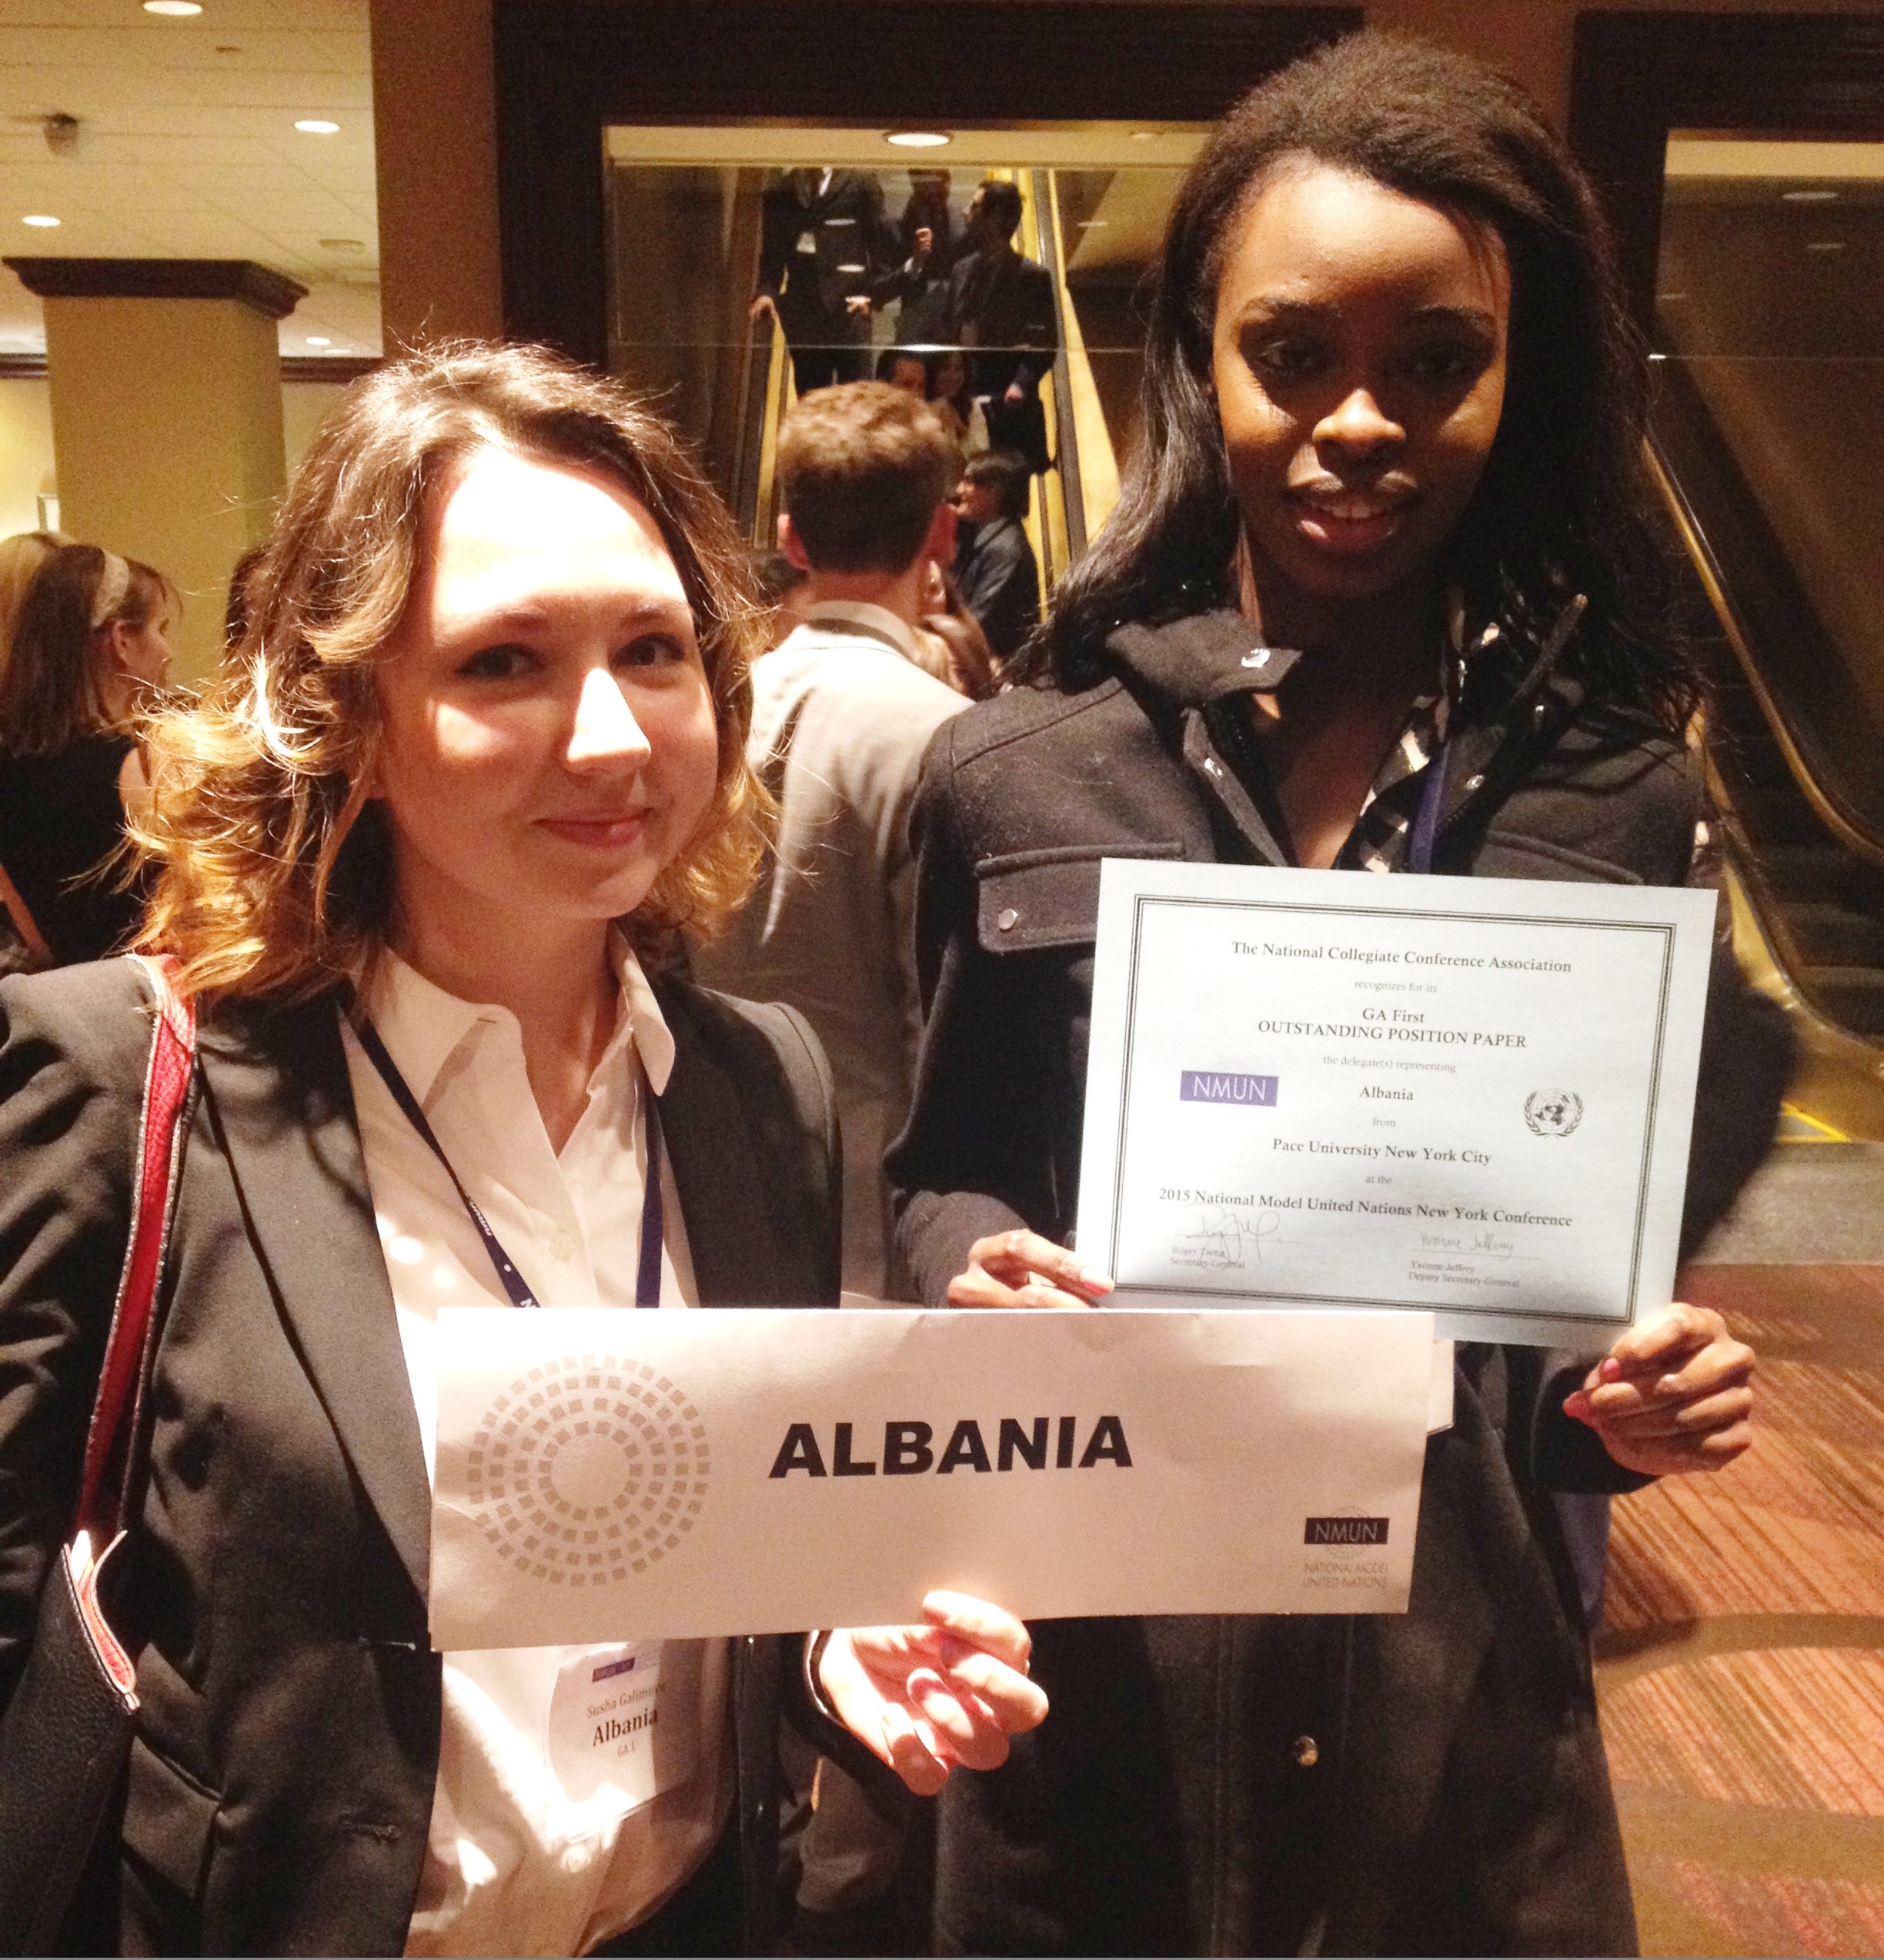 Pace students Latrelle Gray Jones-Booker and Syuyumbika Galimova display their Outstanding Position Paper award at the 2015 National Model United Nations conference in New York City.